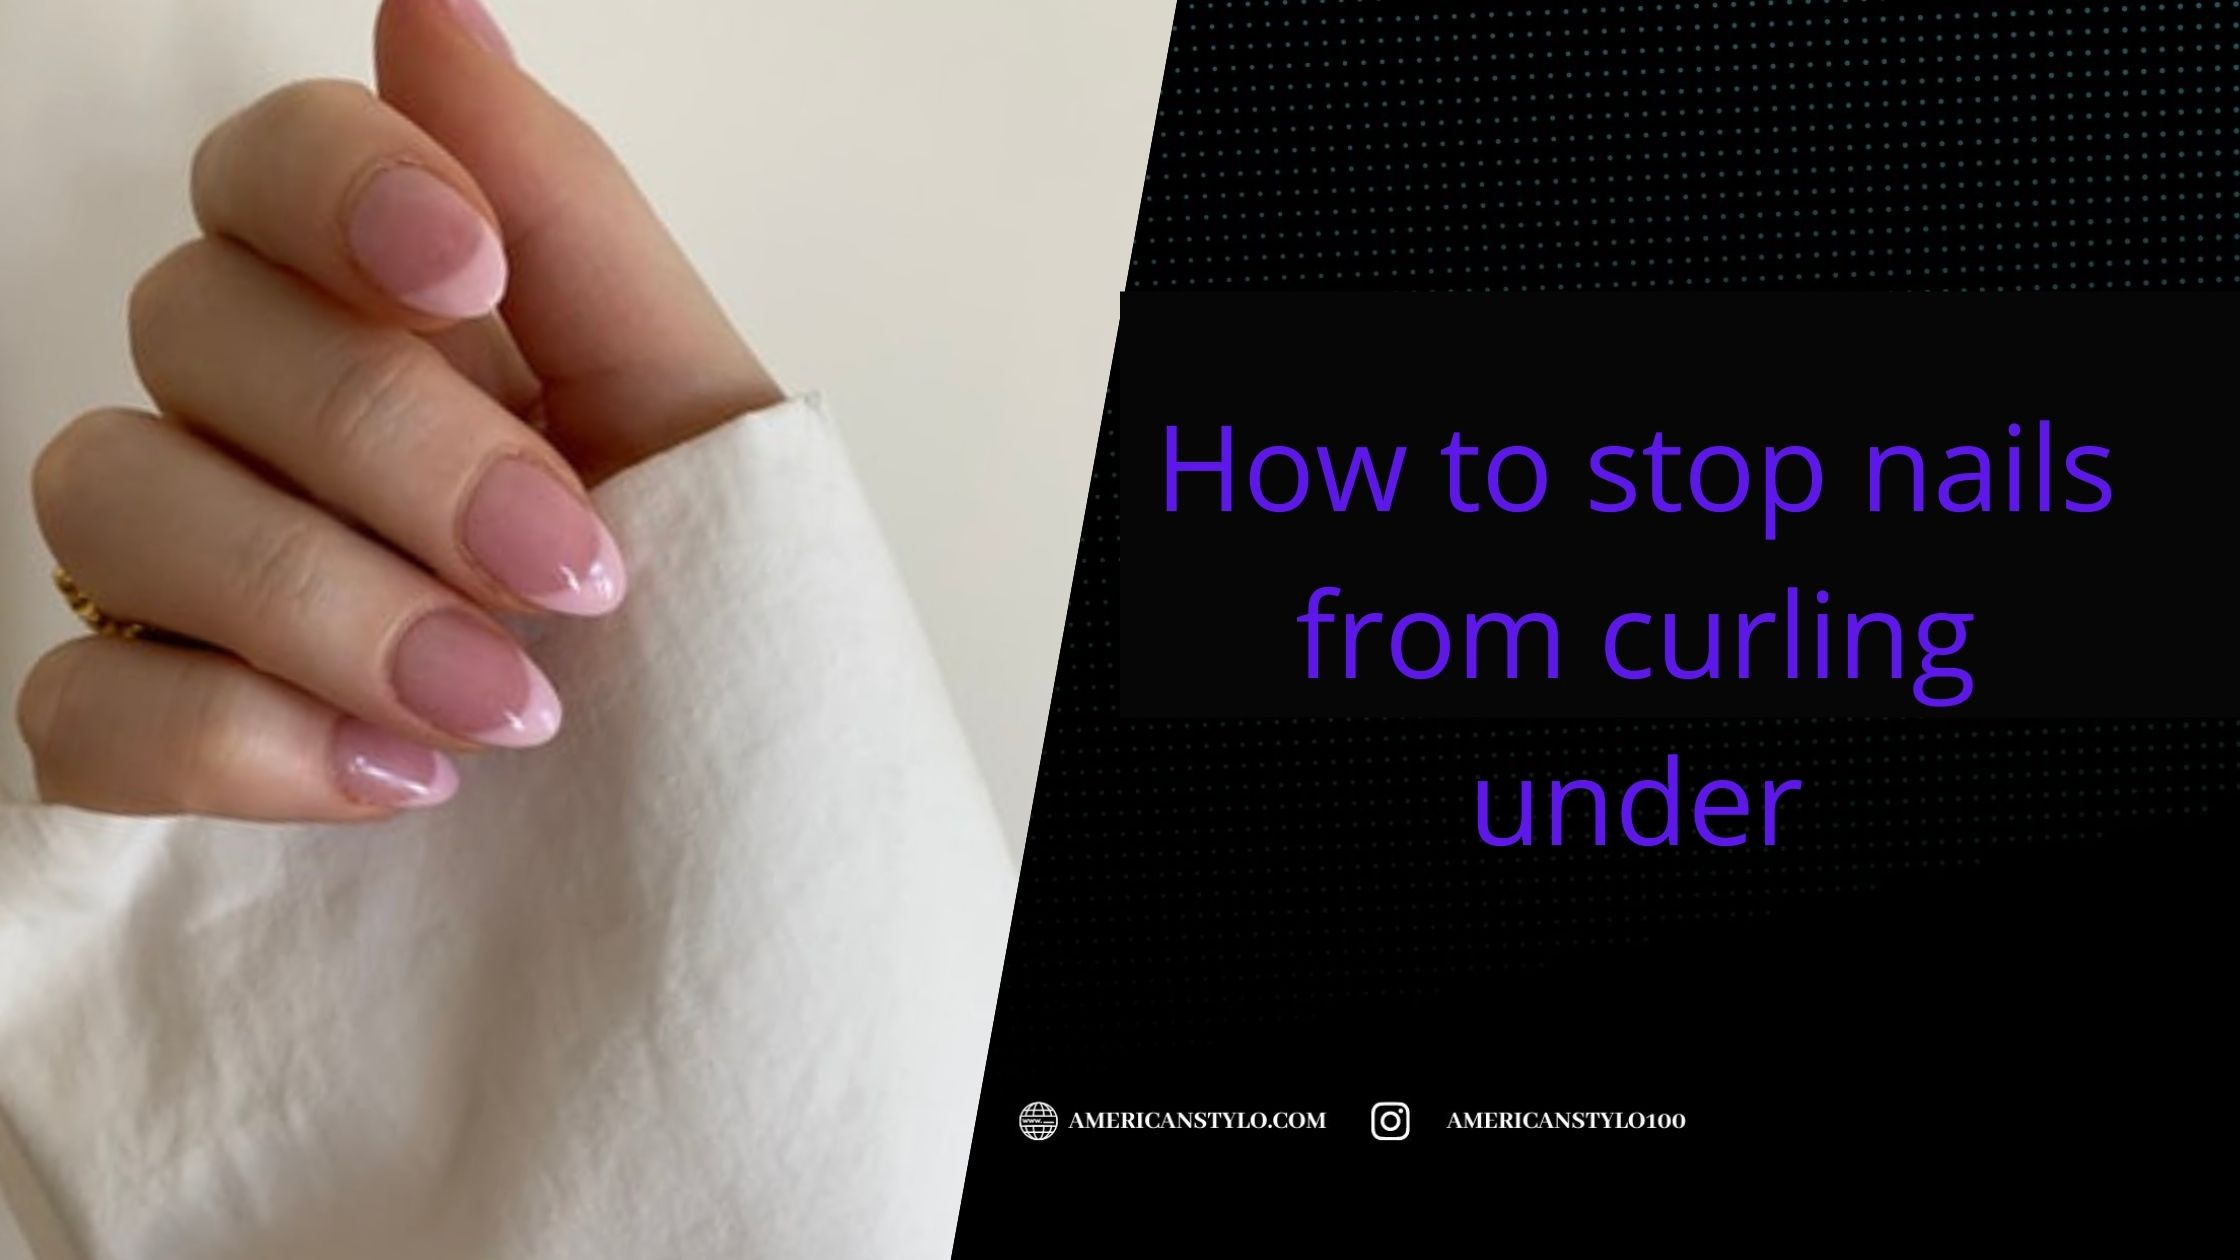 How to stop nails from curling under